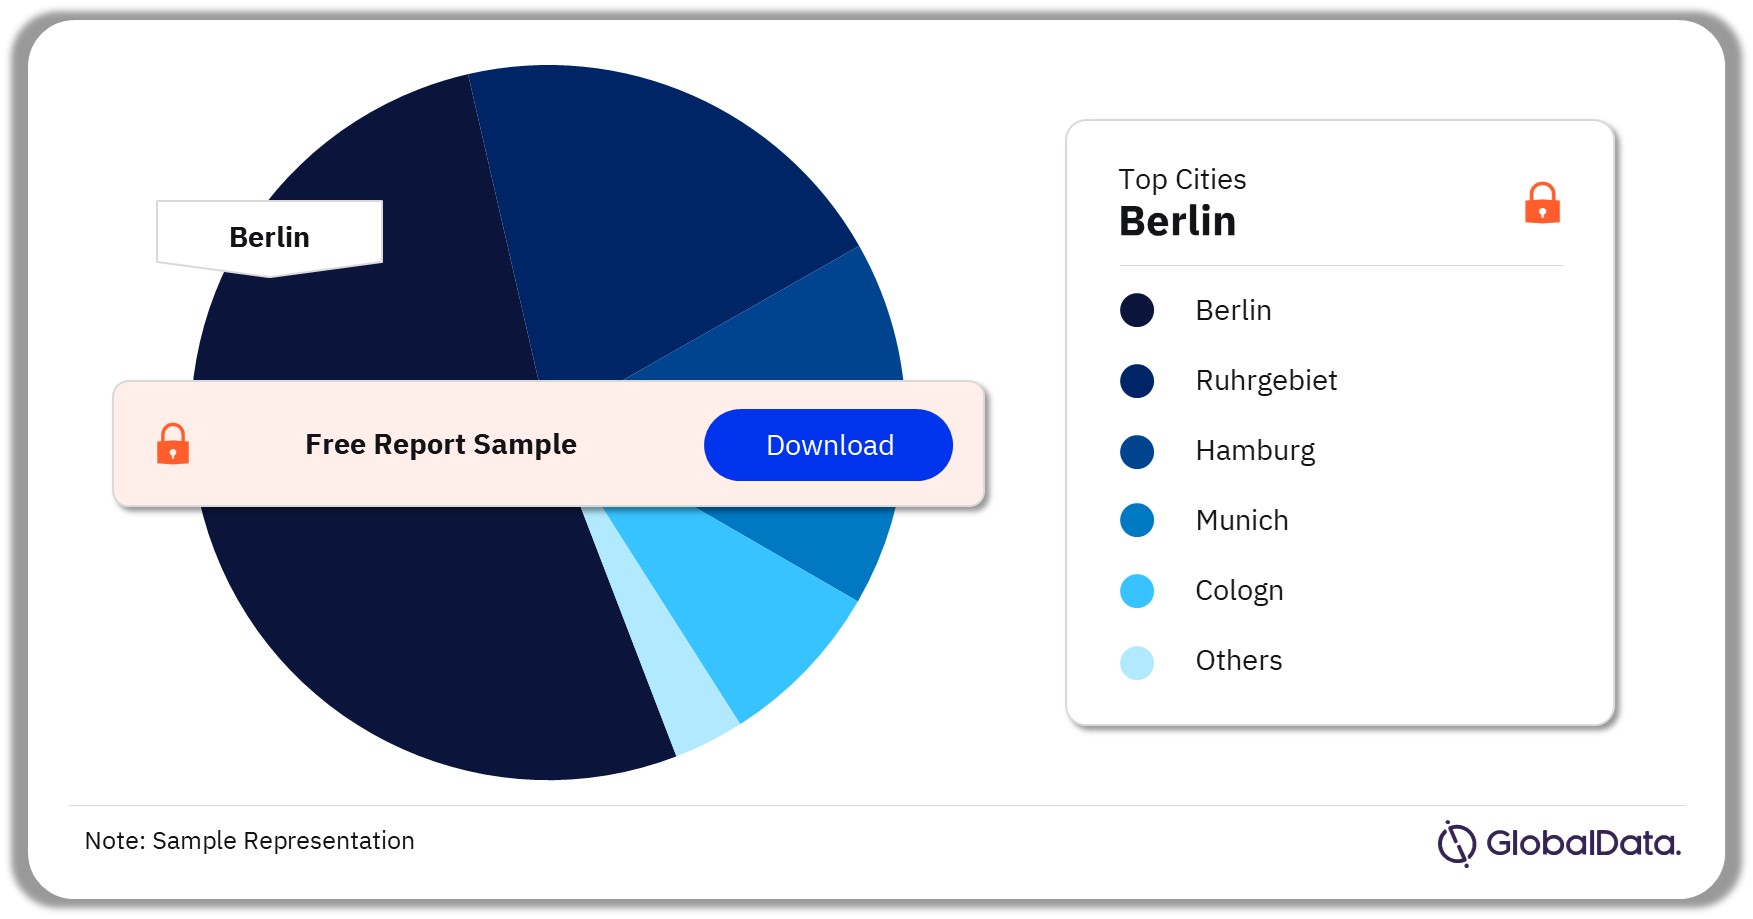 Germany Make-up Market Analysis, by Top Cities, 2021 (%)